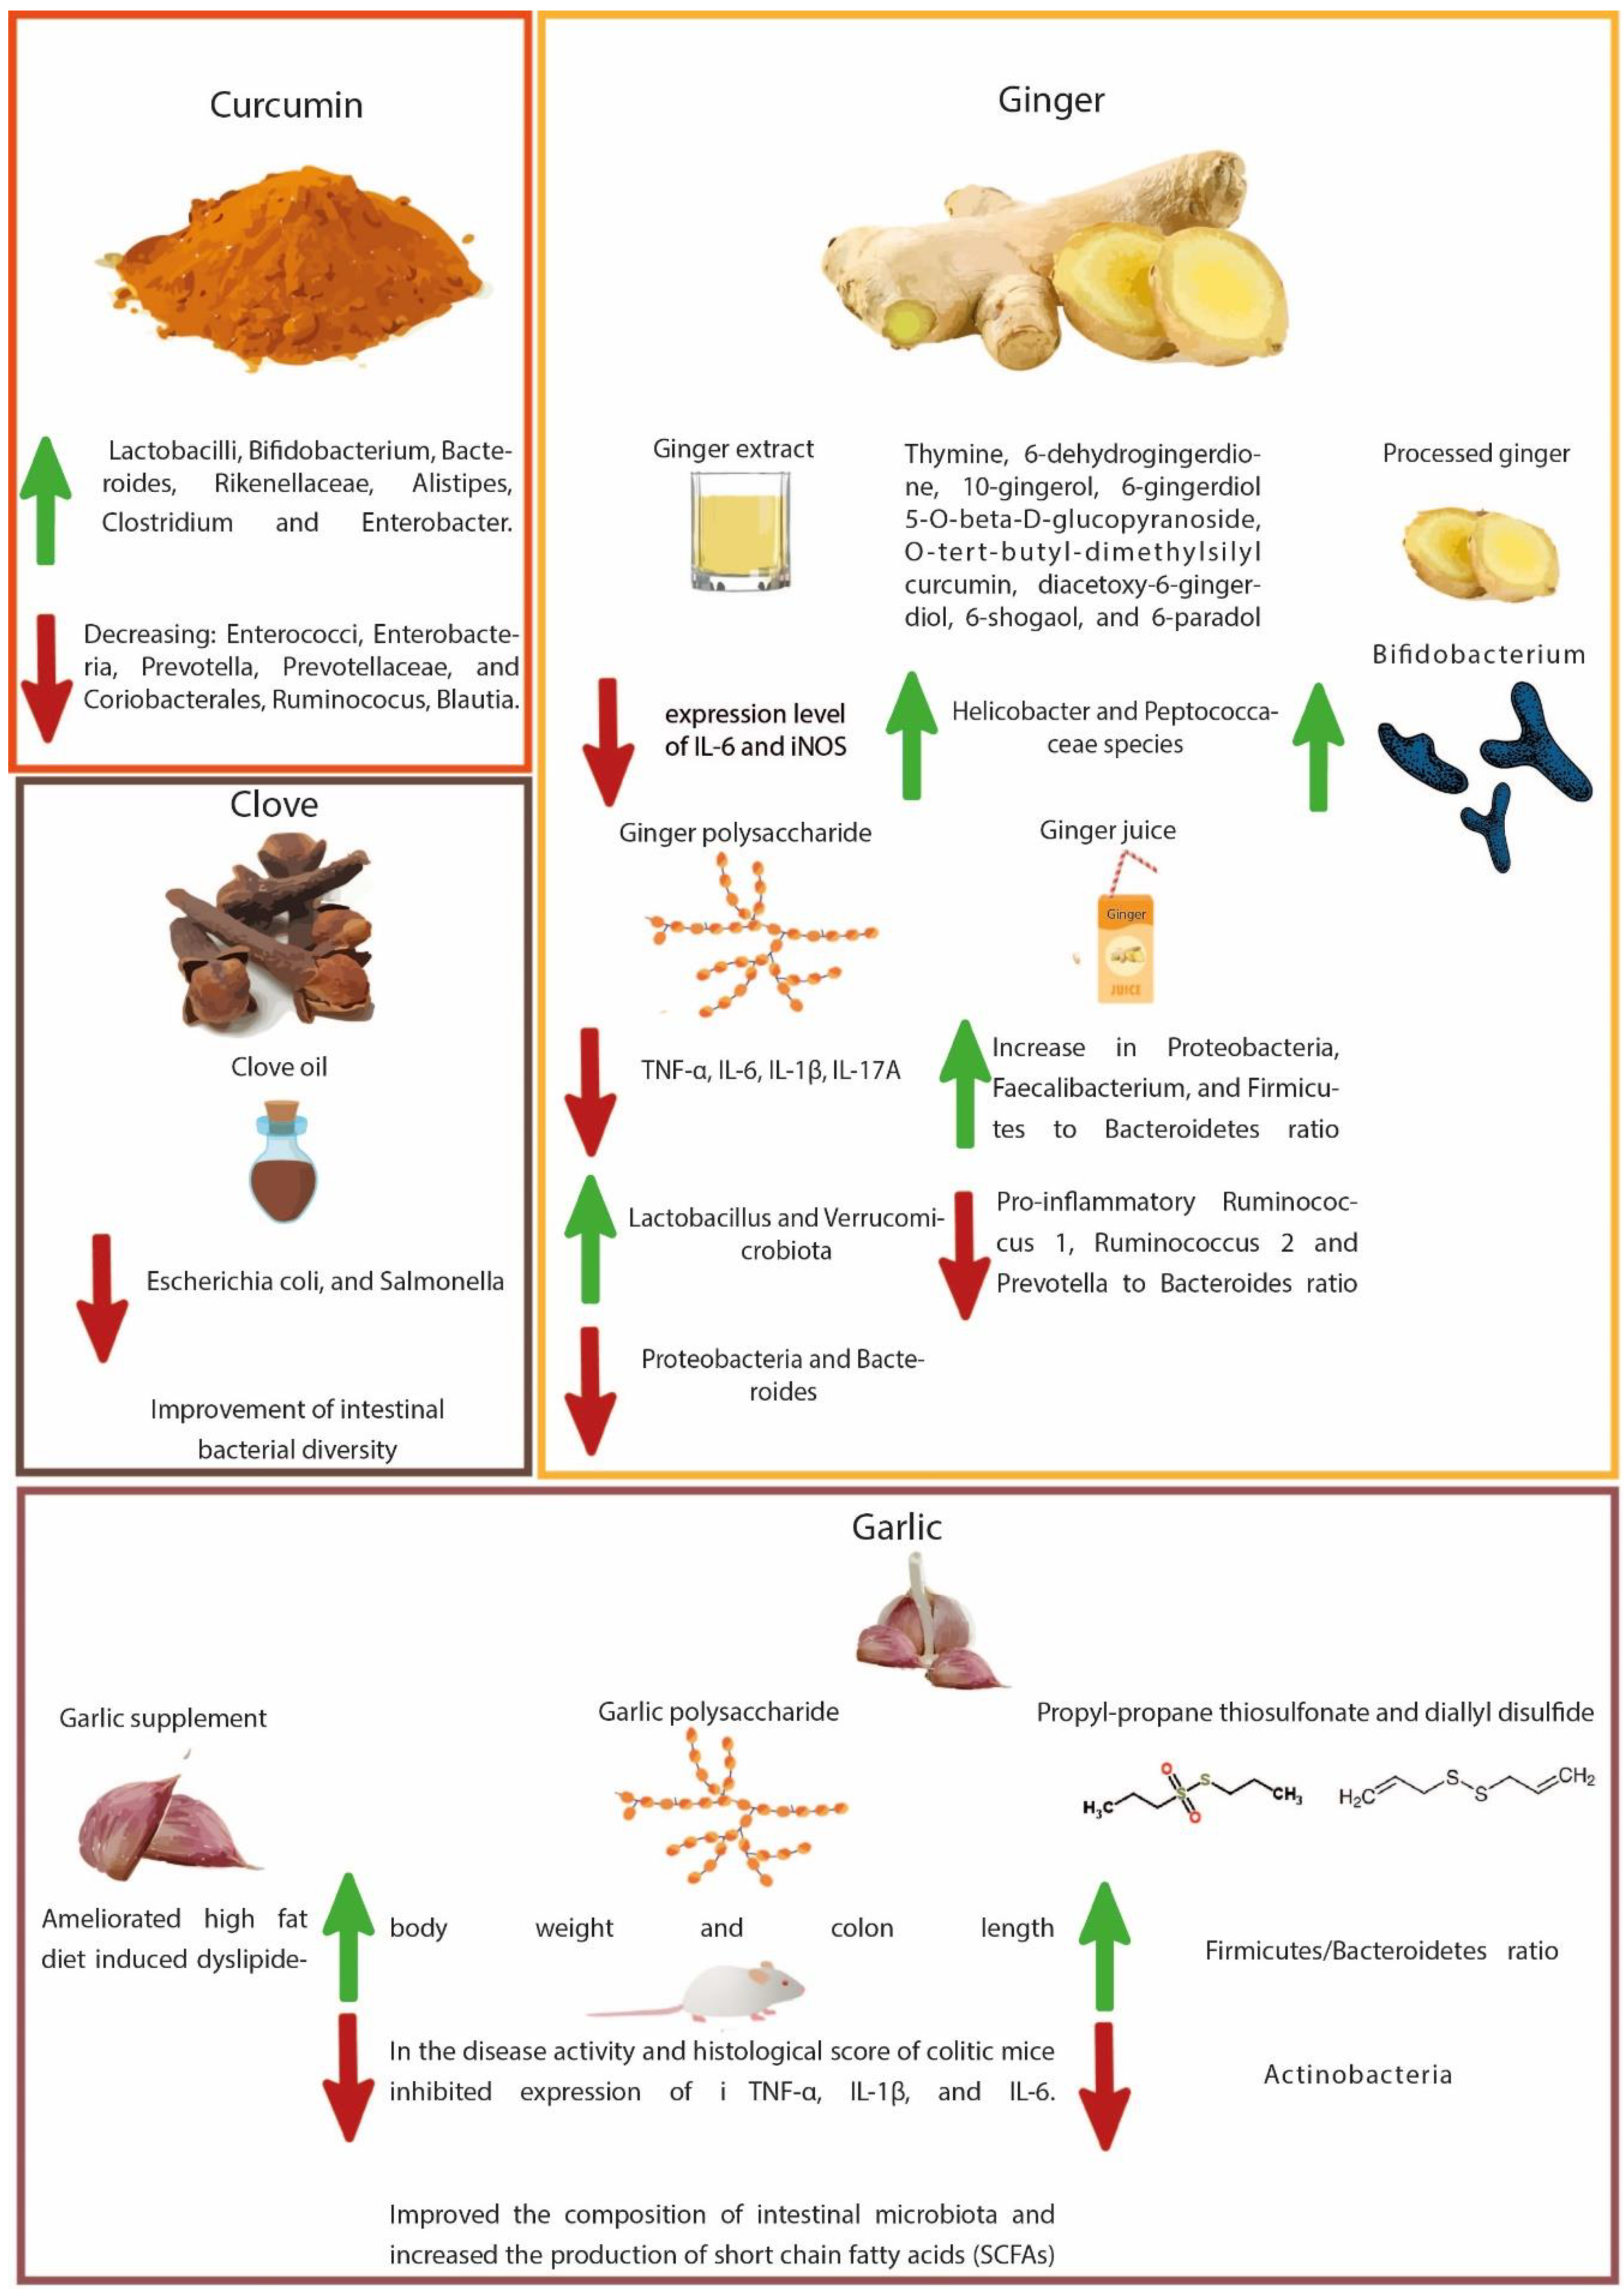 Cancers | Free Full-Text | Spice-Derived Bioactive Compounds Confer Colorectal  Cancer Prevention via Modulation of Gut Microbiota